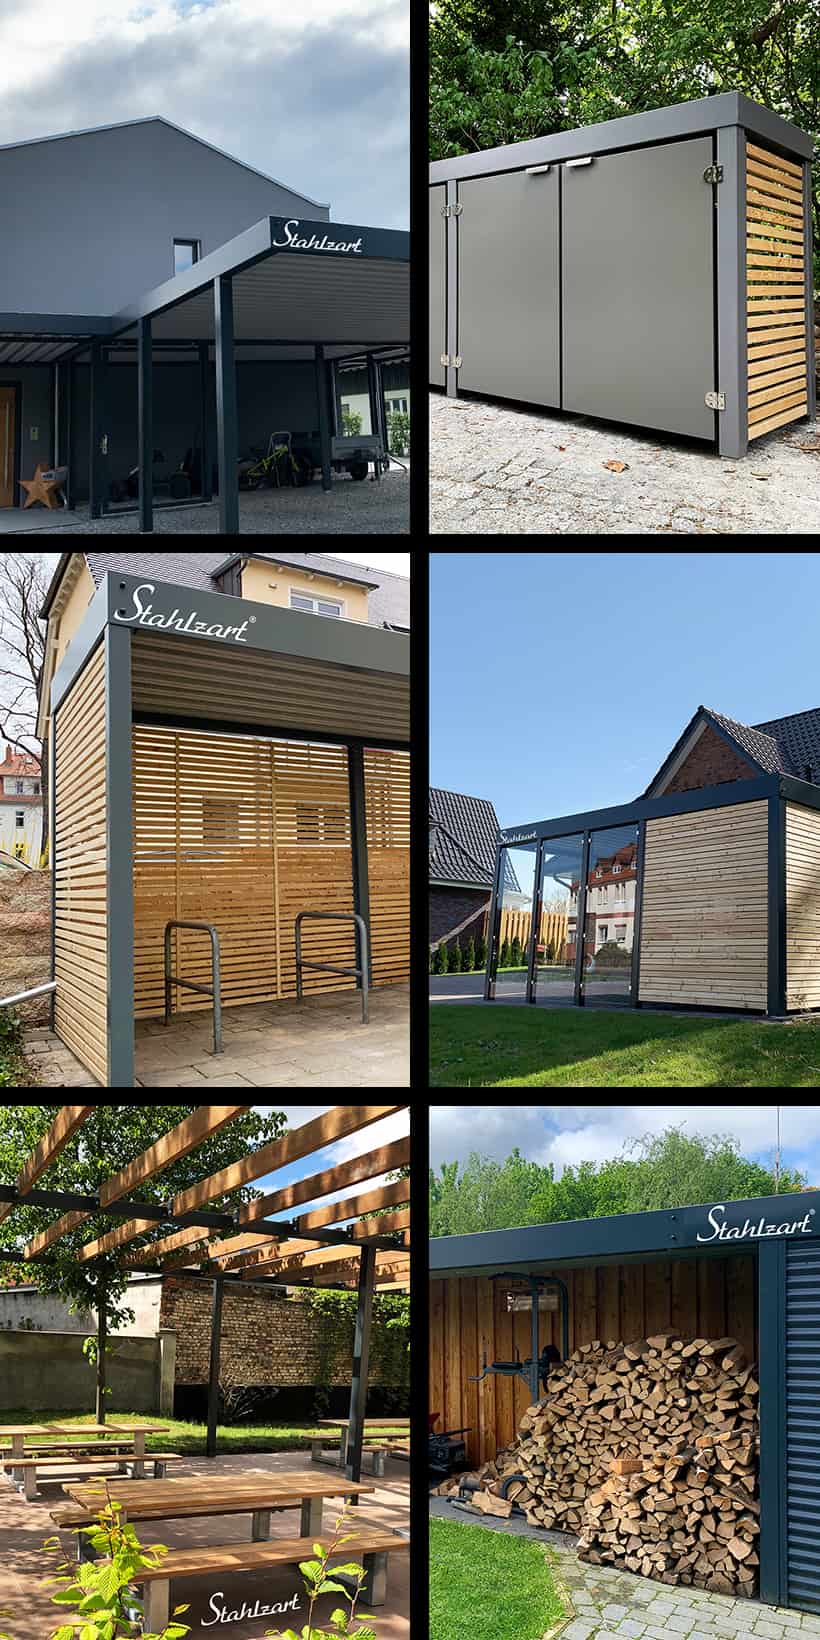 stahlzart-architecture-carport-single-carport-double-carport-row-carport-garage-for-bicycles-privacy-screen-fence-green-classroom-firewood-storage-box-for-trashcans-modern-design-made-in-germany